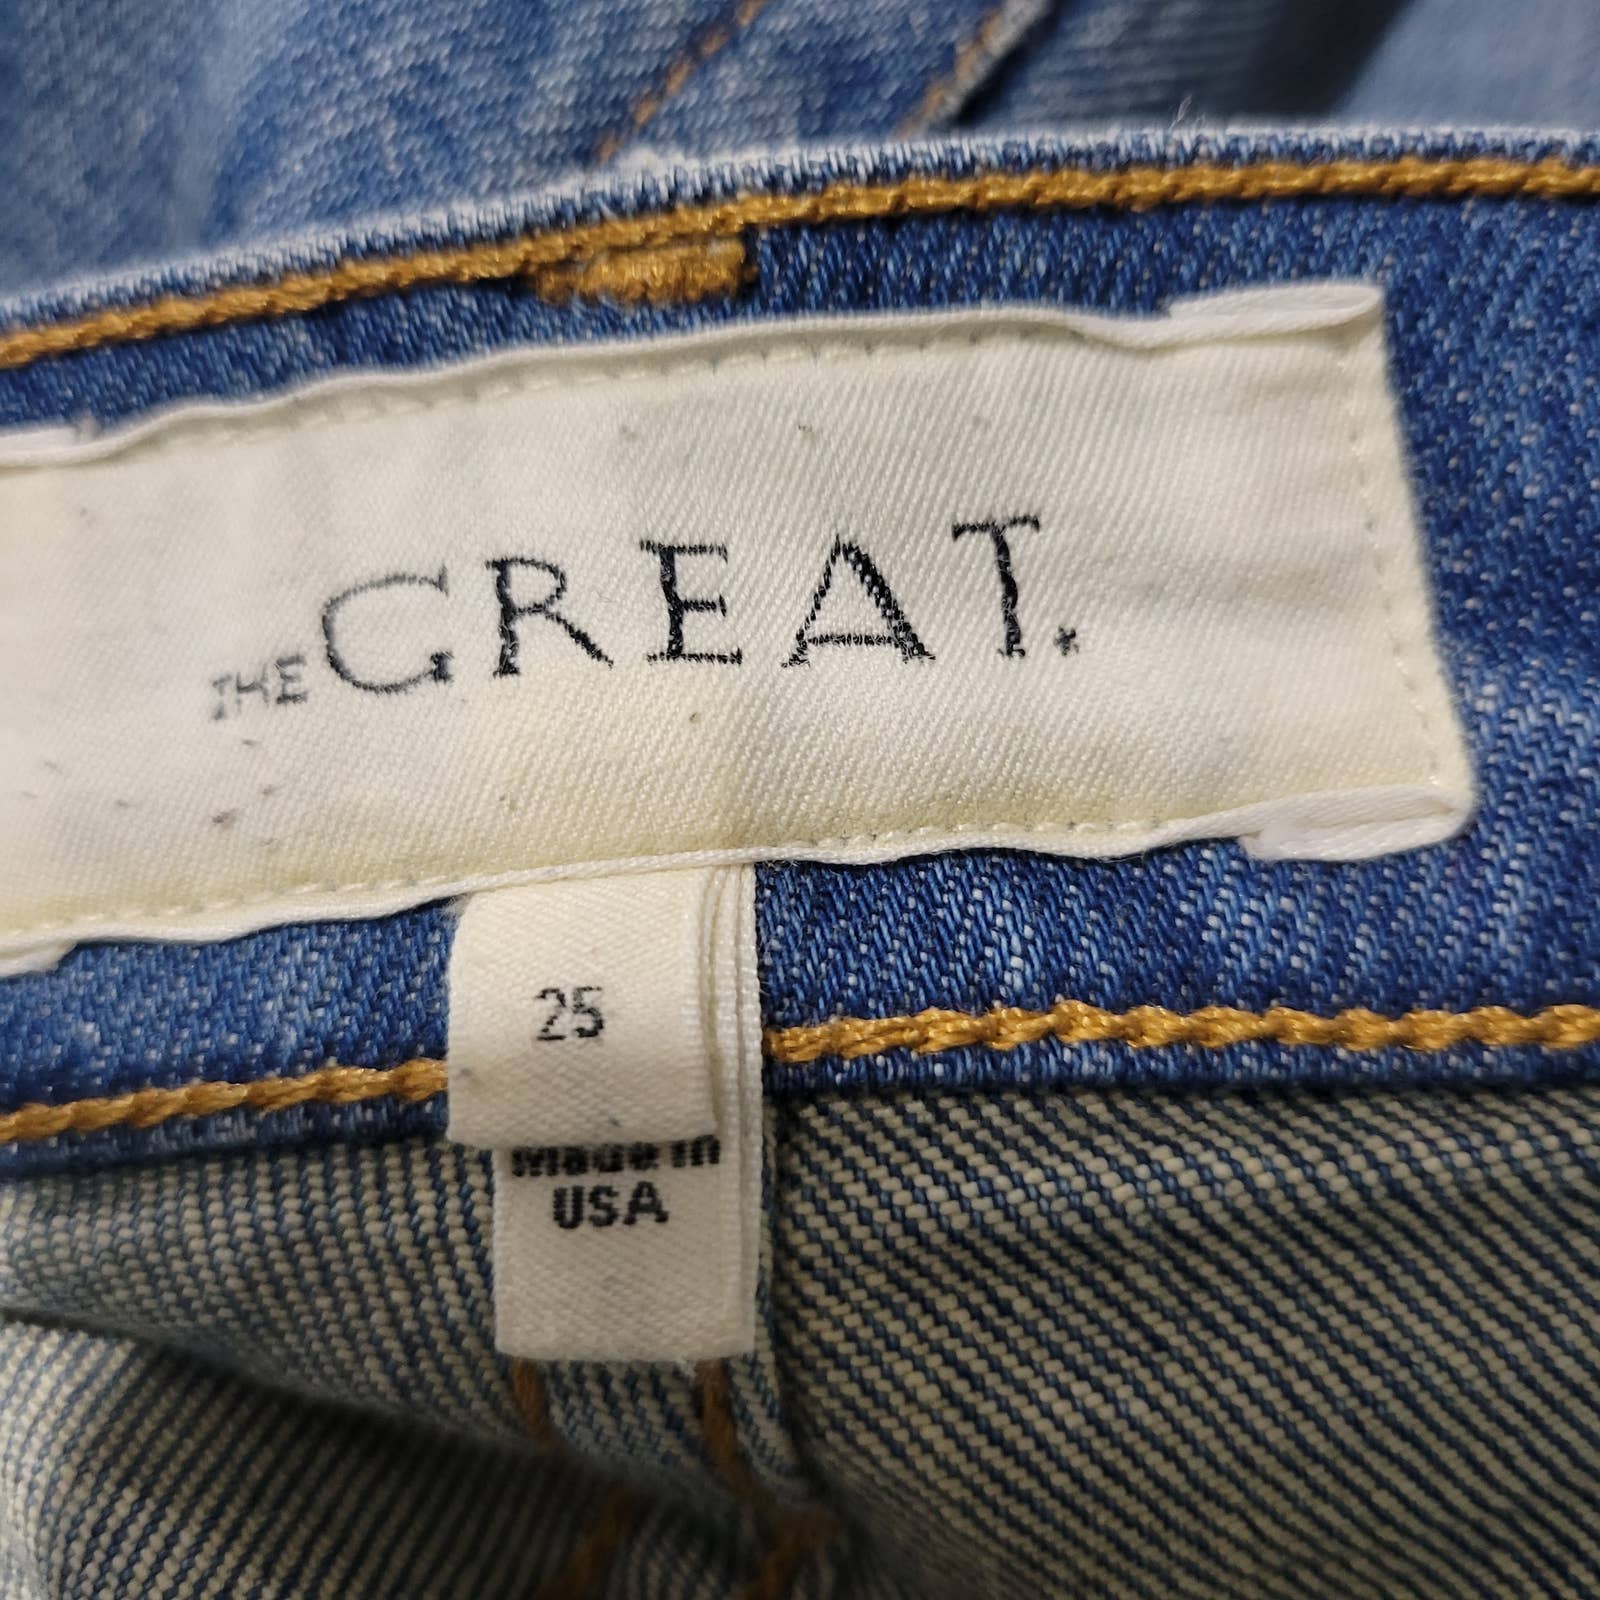 The Great Jeans Straight A Button Fly Blue Medium Wash High Waist Size 25